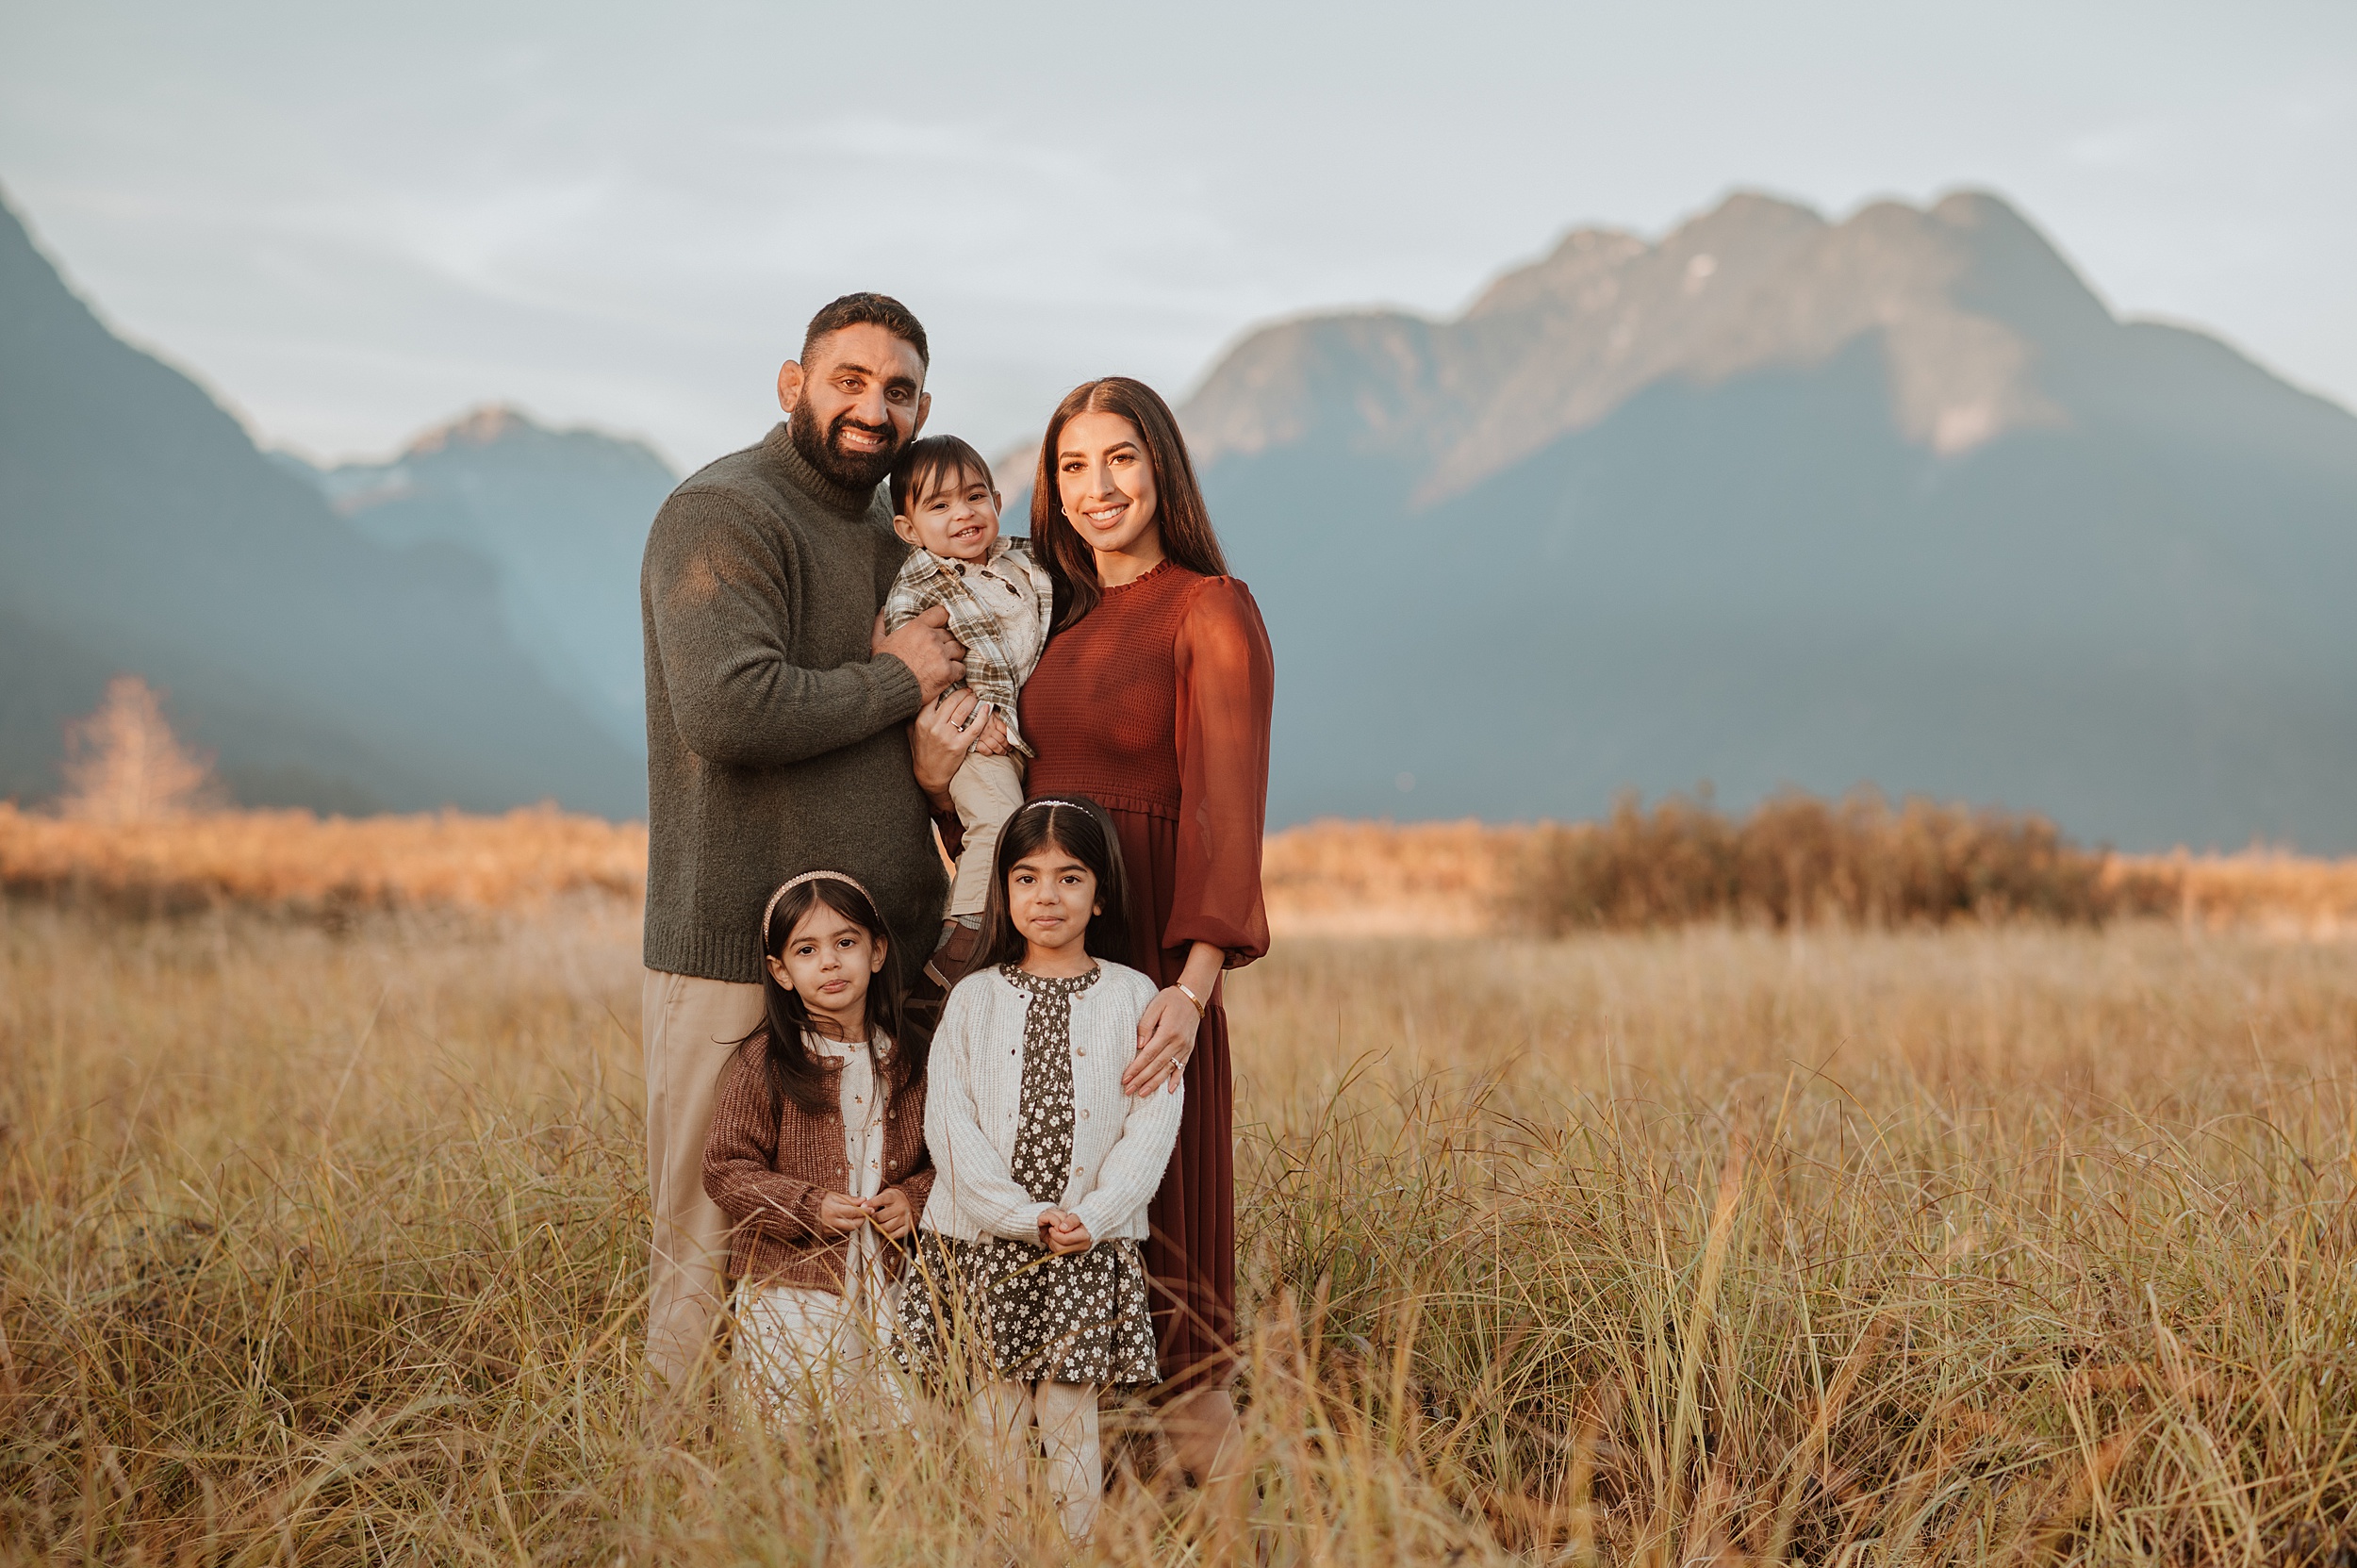 Happy mom and dad stand in a park field surrounded by mountains with their toddler son and two toddler daughters